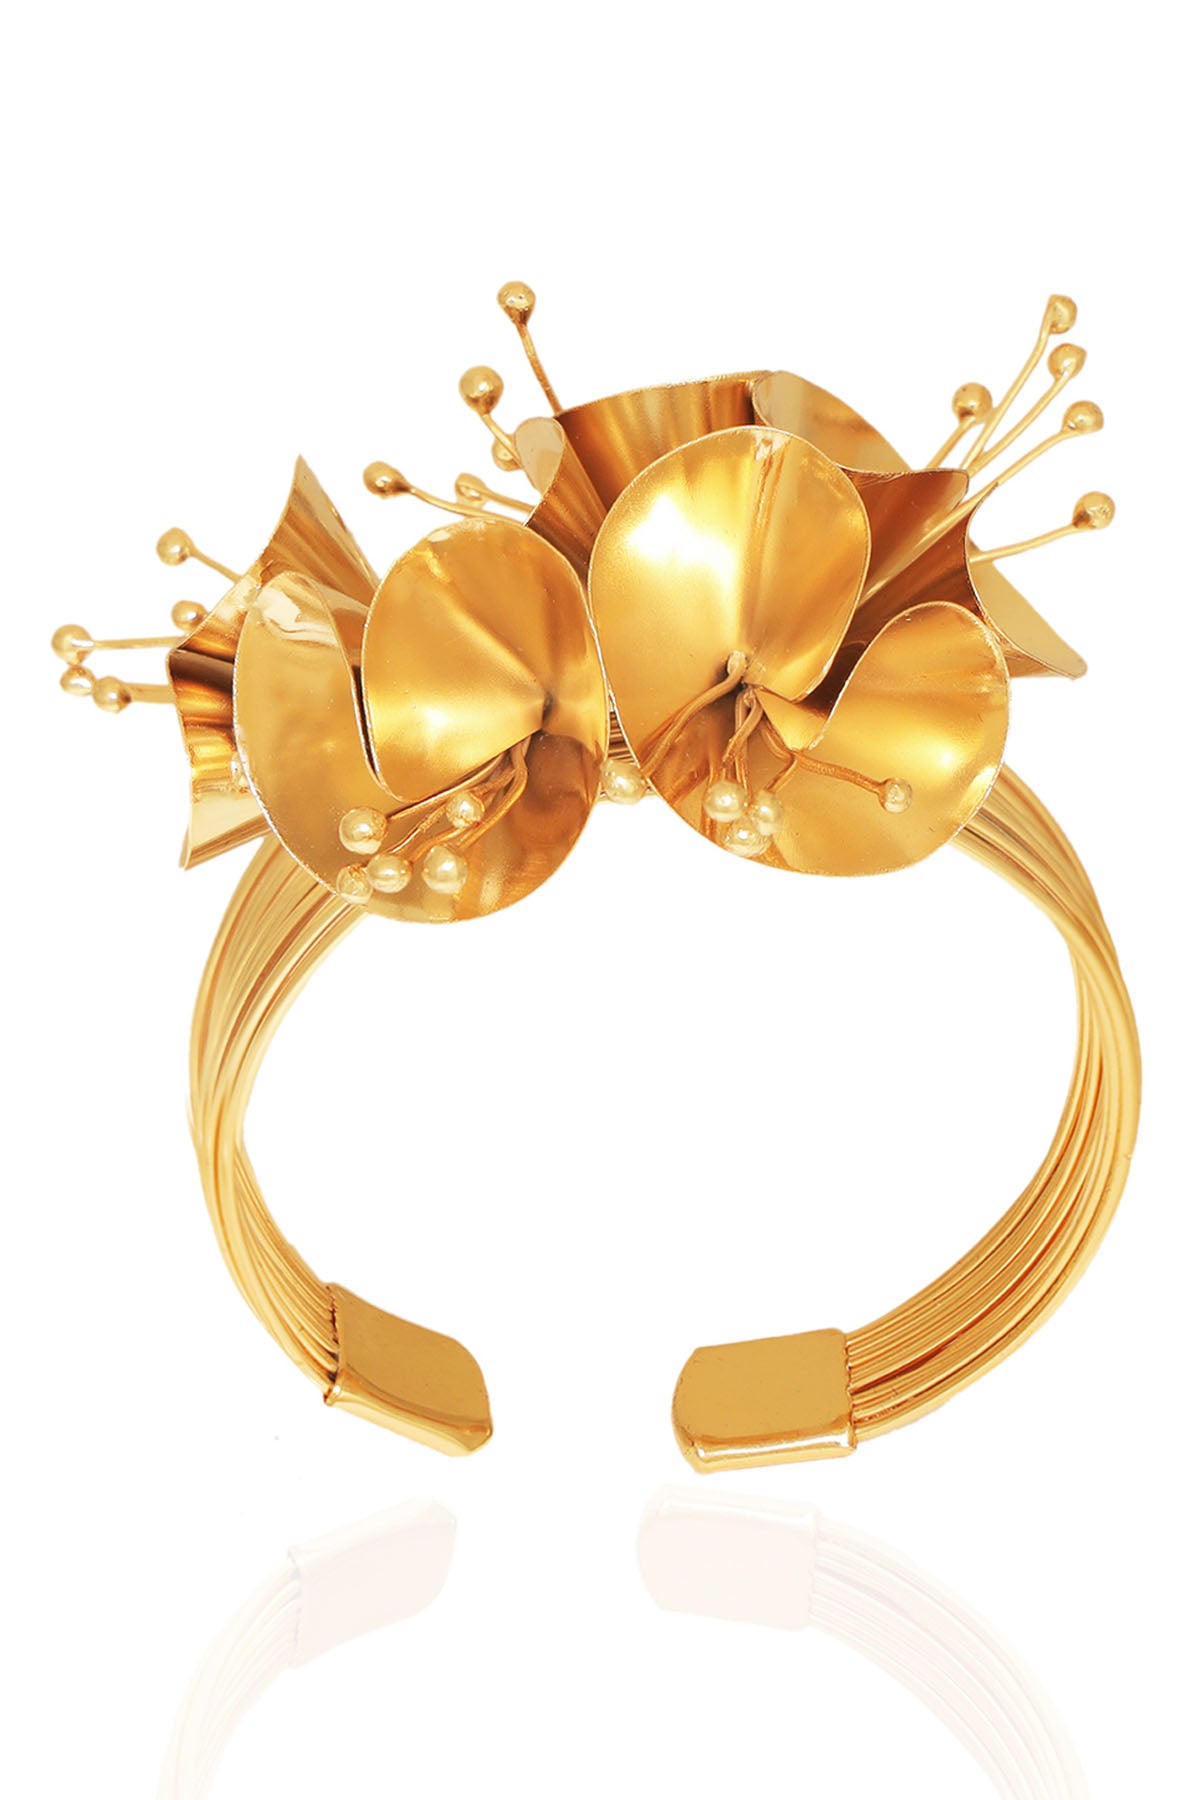 Gold Plated Chic Handcuff